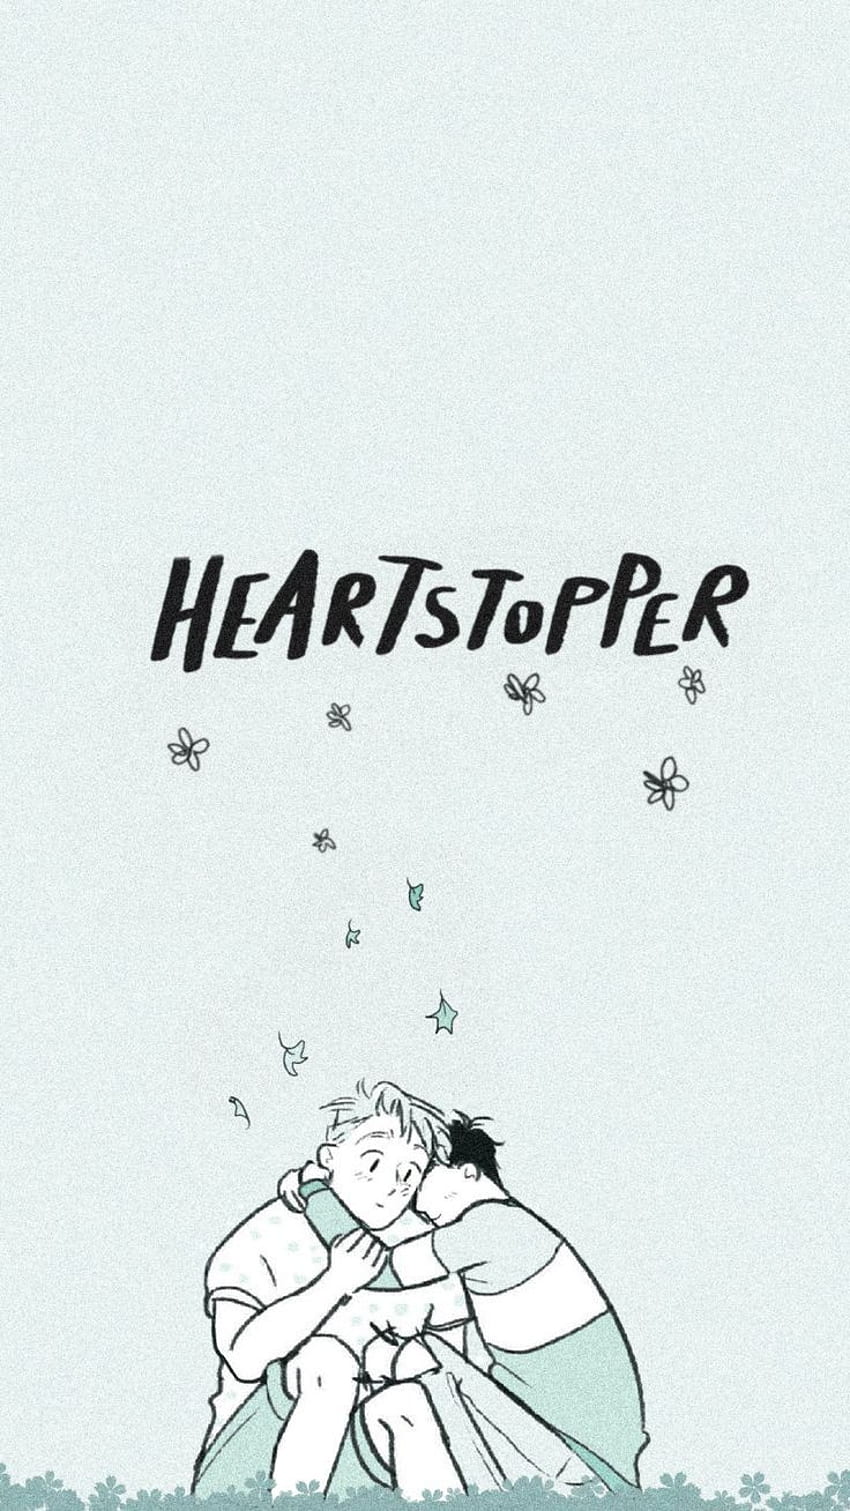 20 Heartstopper HD Wallpapers and Backgrounds